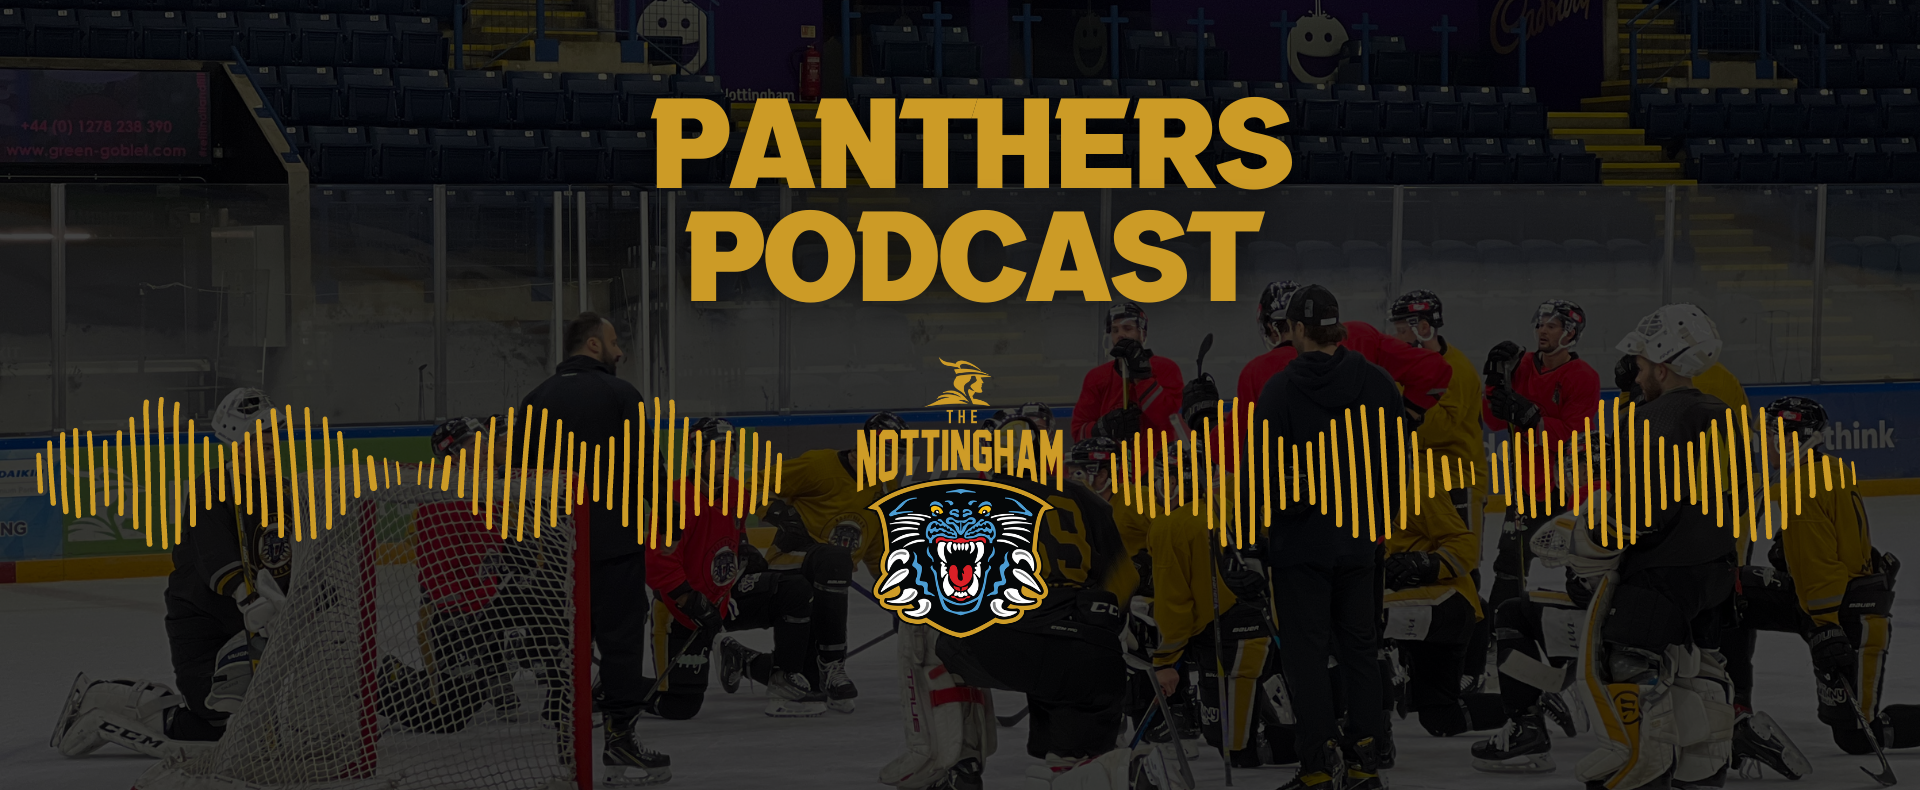 SEASON PREVIEW ON PANTHERS PODCAST Top Image